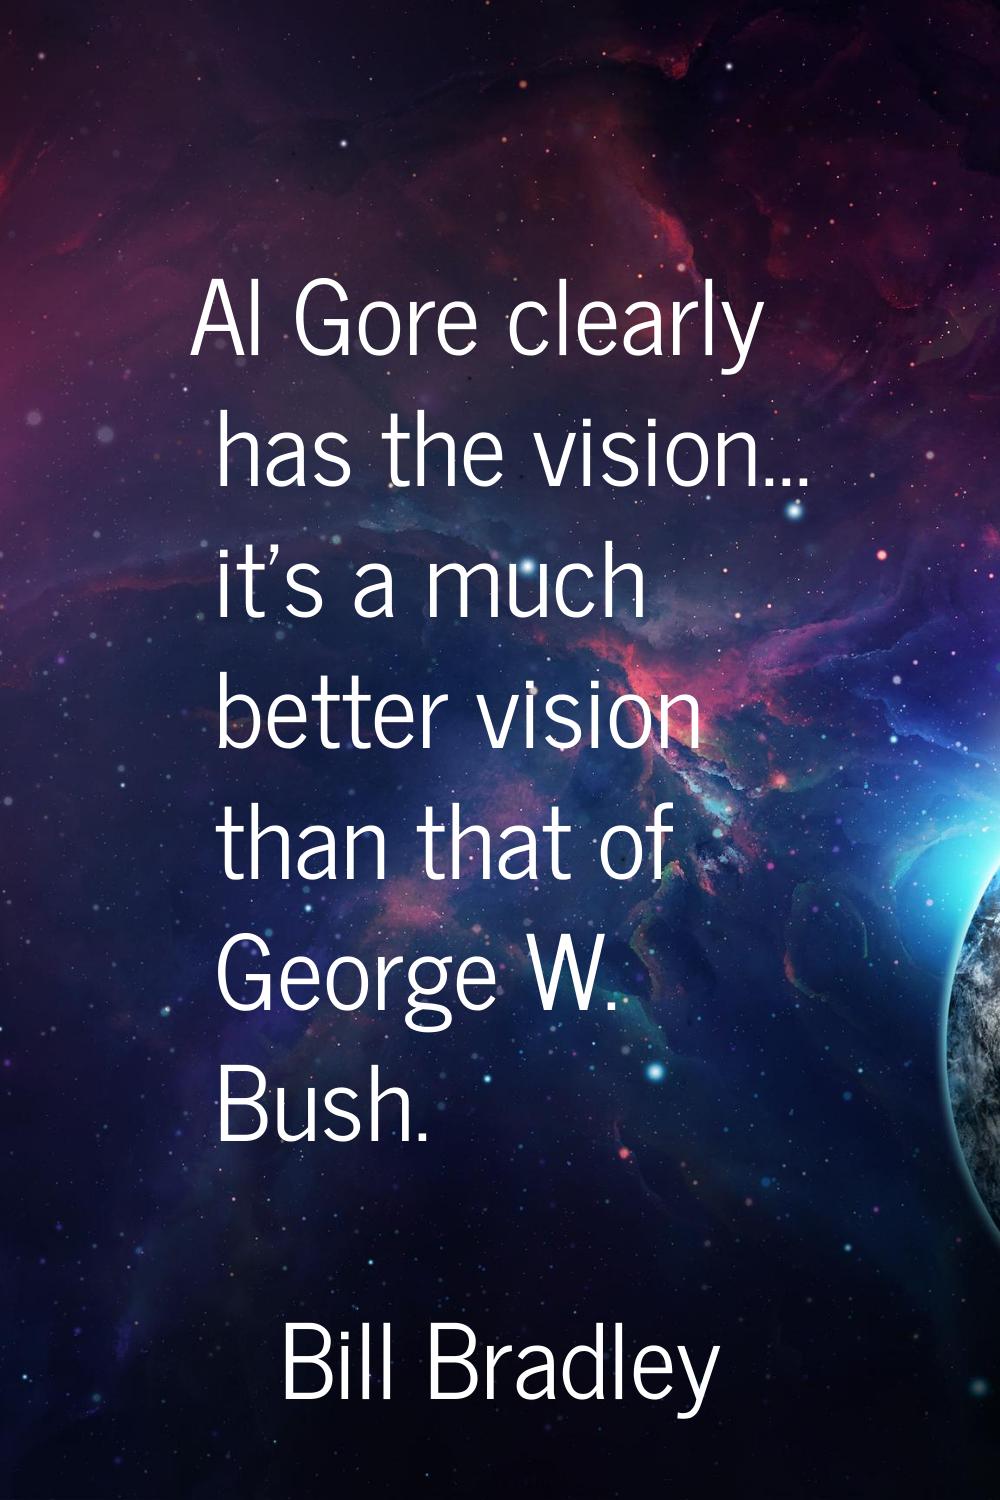 Al Gore clearly has the vision... it's a much better vision than that of George W. Bush.